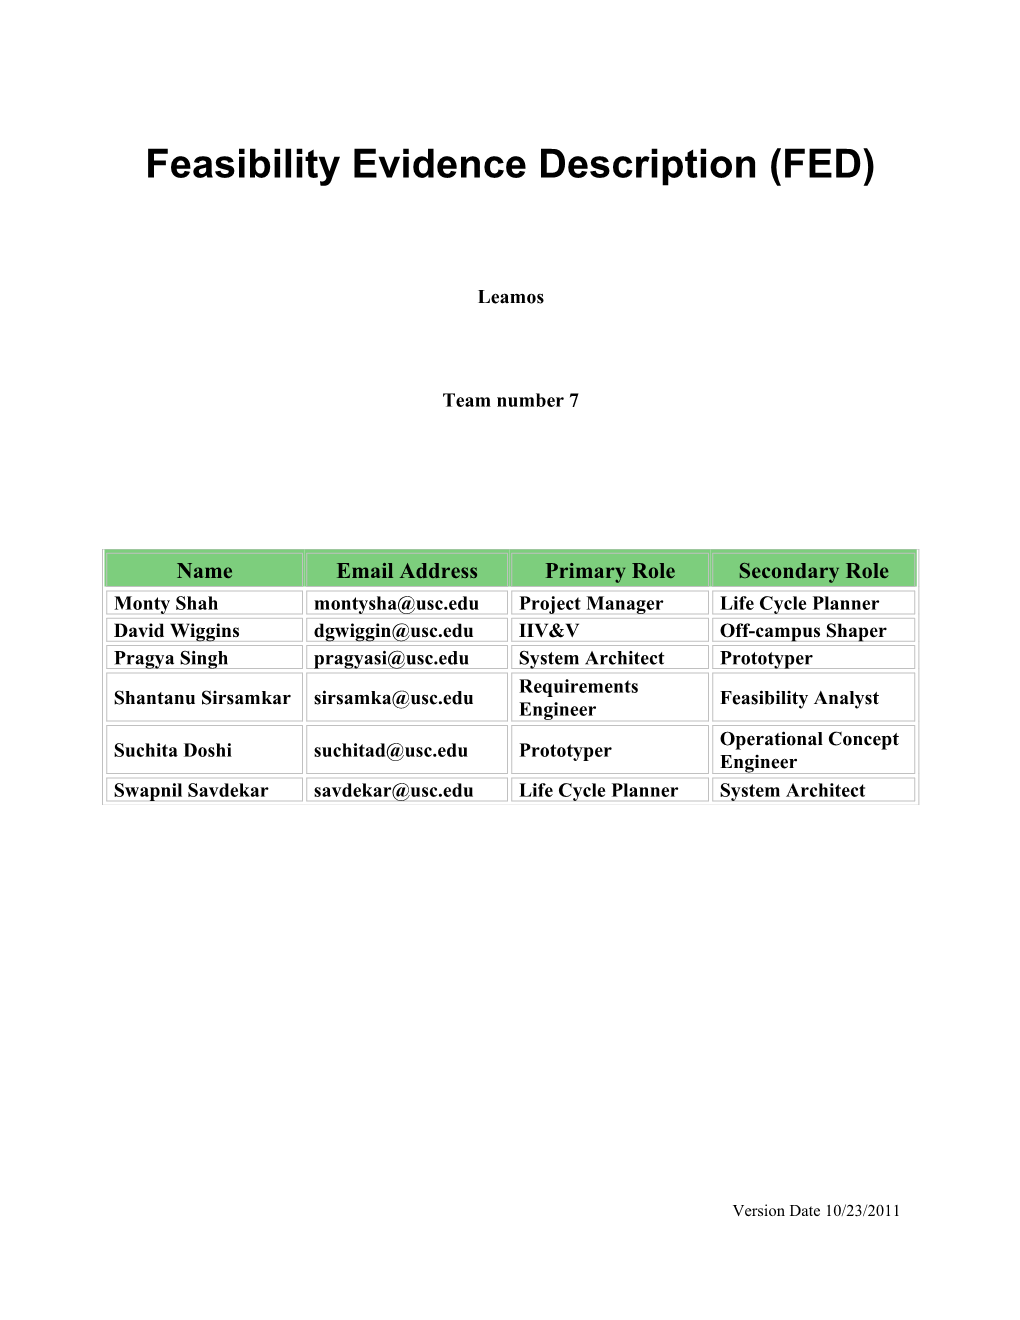 Feasibility Evidence Description (FED) for NDI/ Ncsversion 2.3